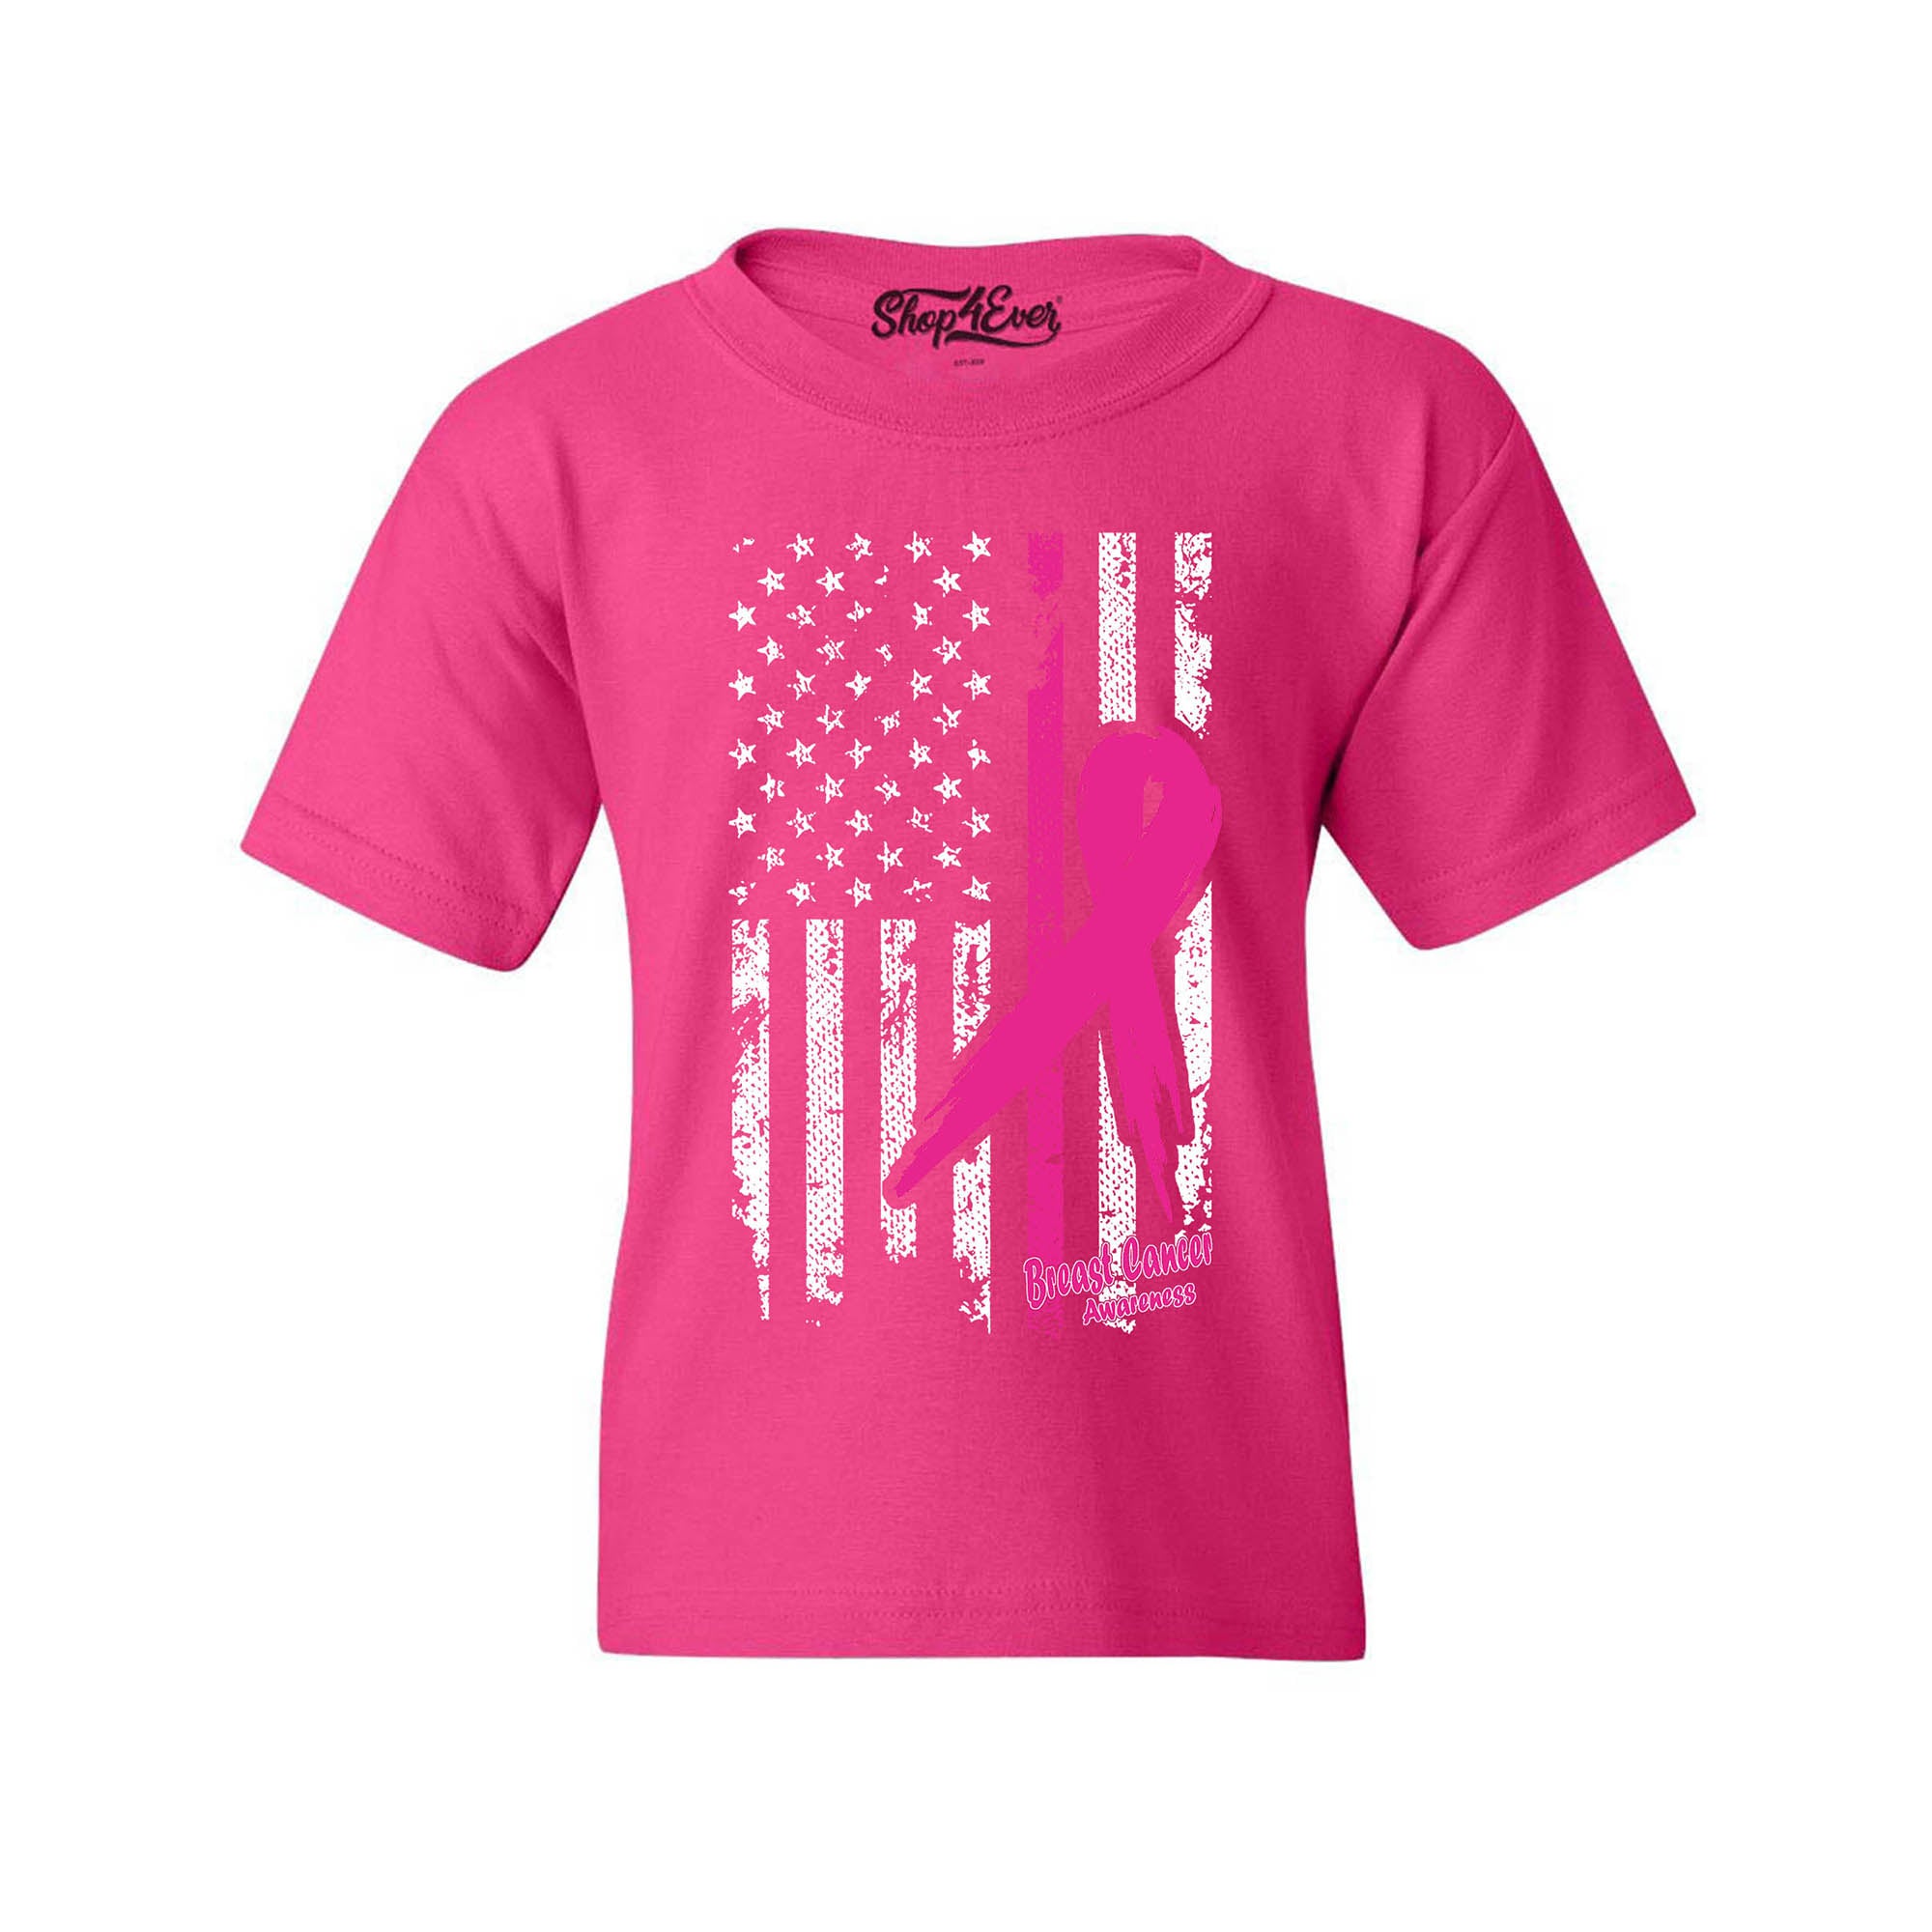 Pink Breast Cancer Ribbon American Flag Youth's T-Shirt Support Awareness Child's Tee